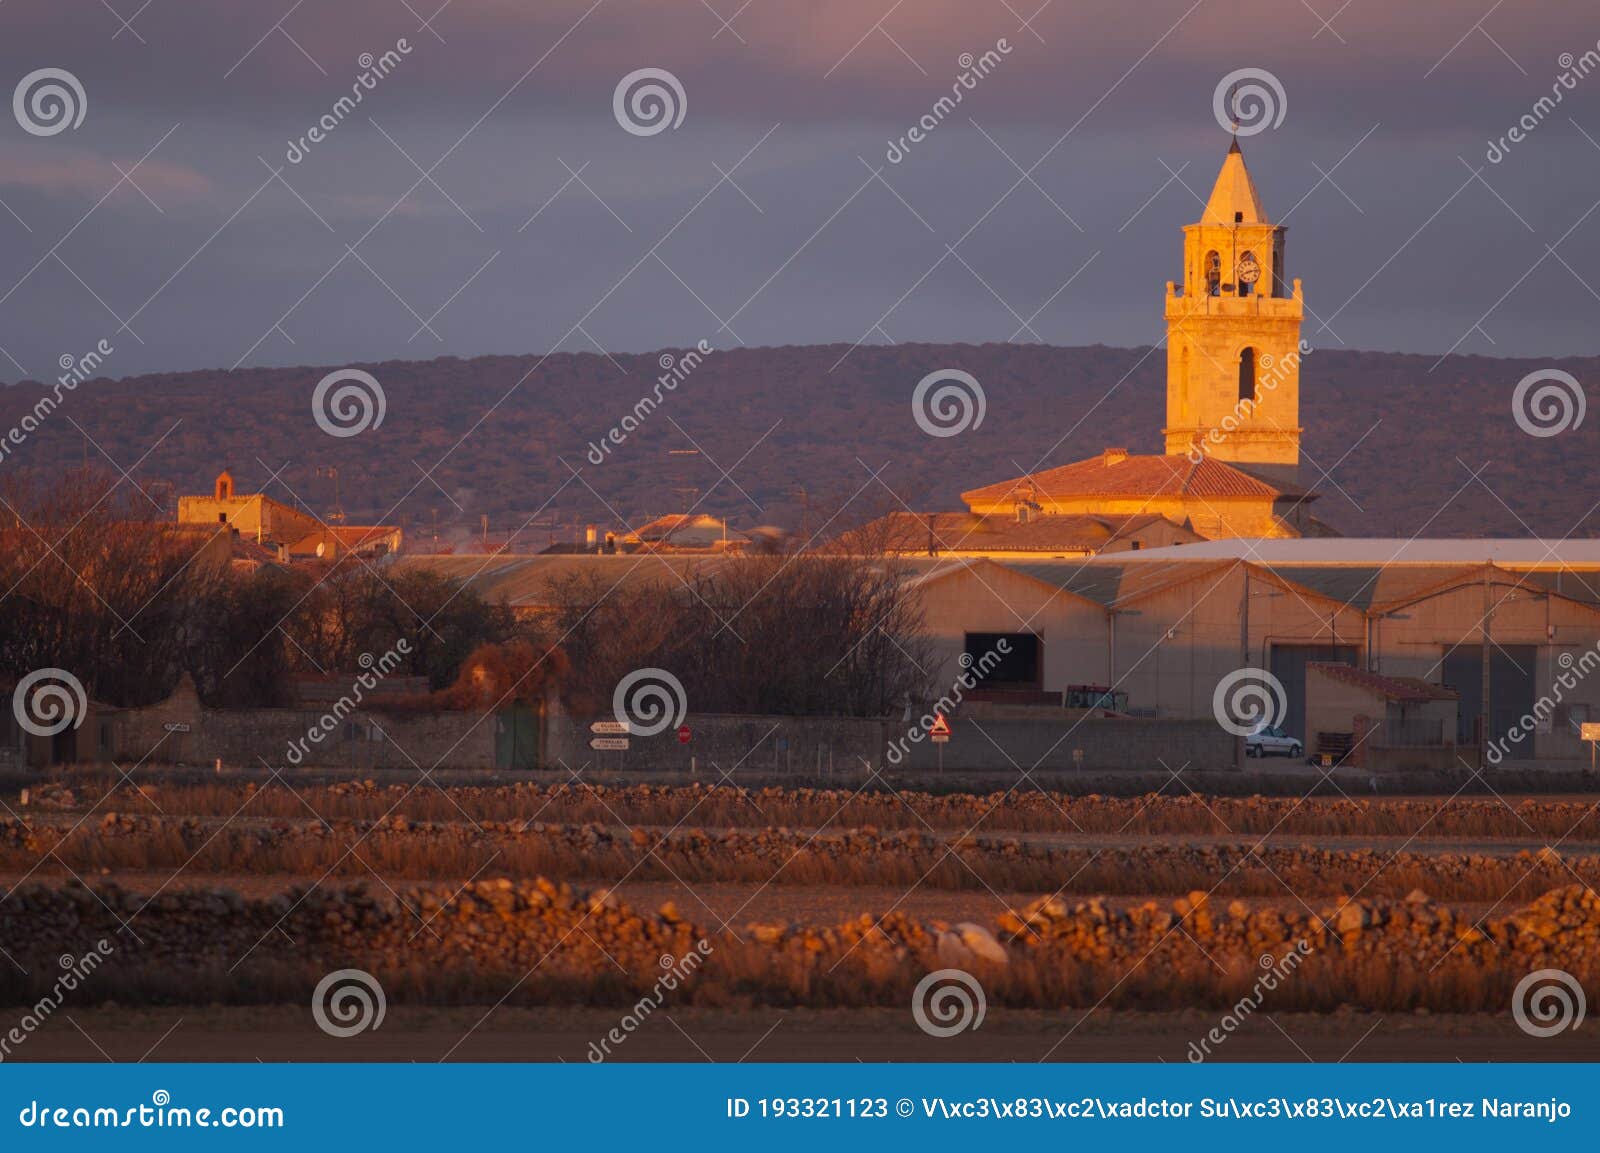 church of the village of bello at dawn.